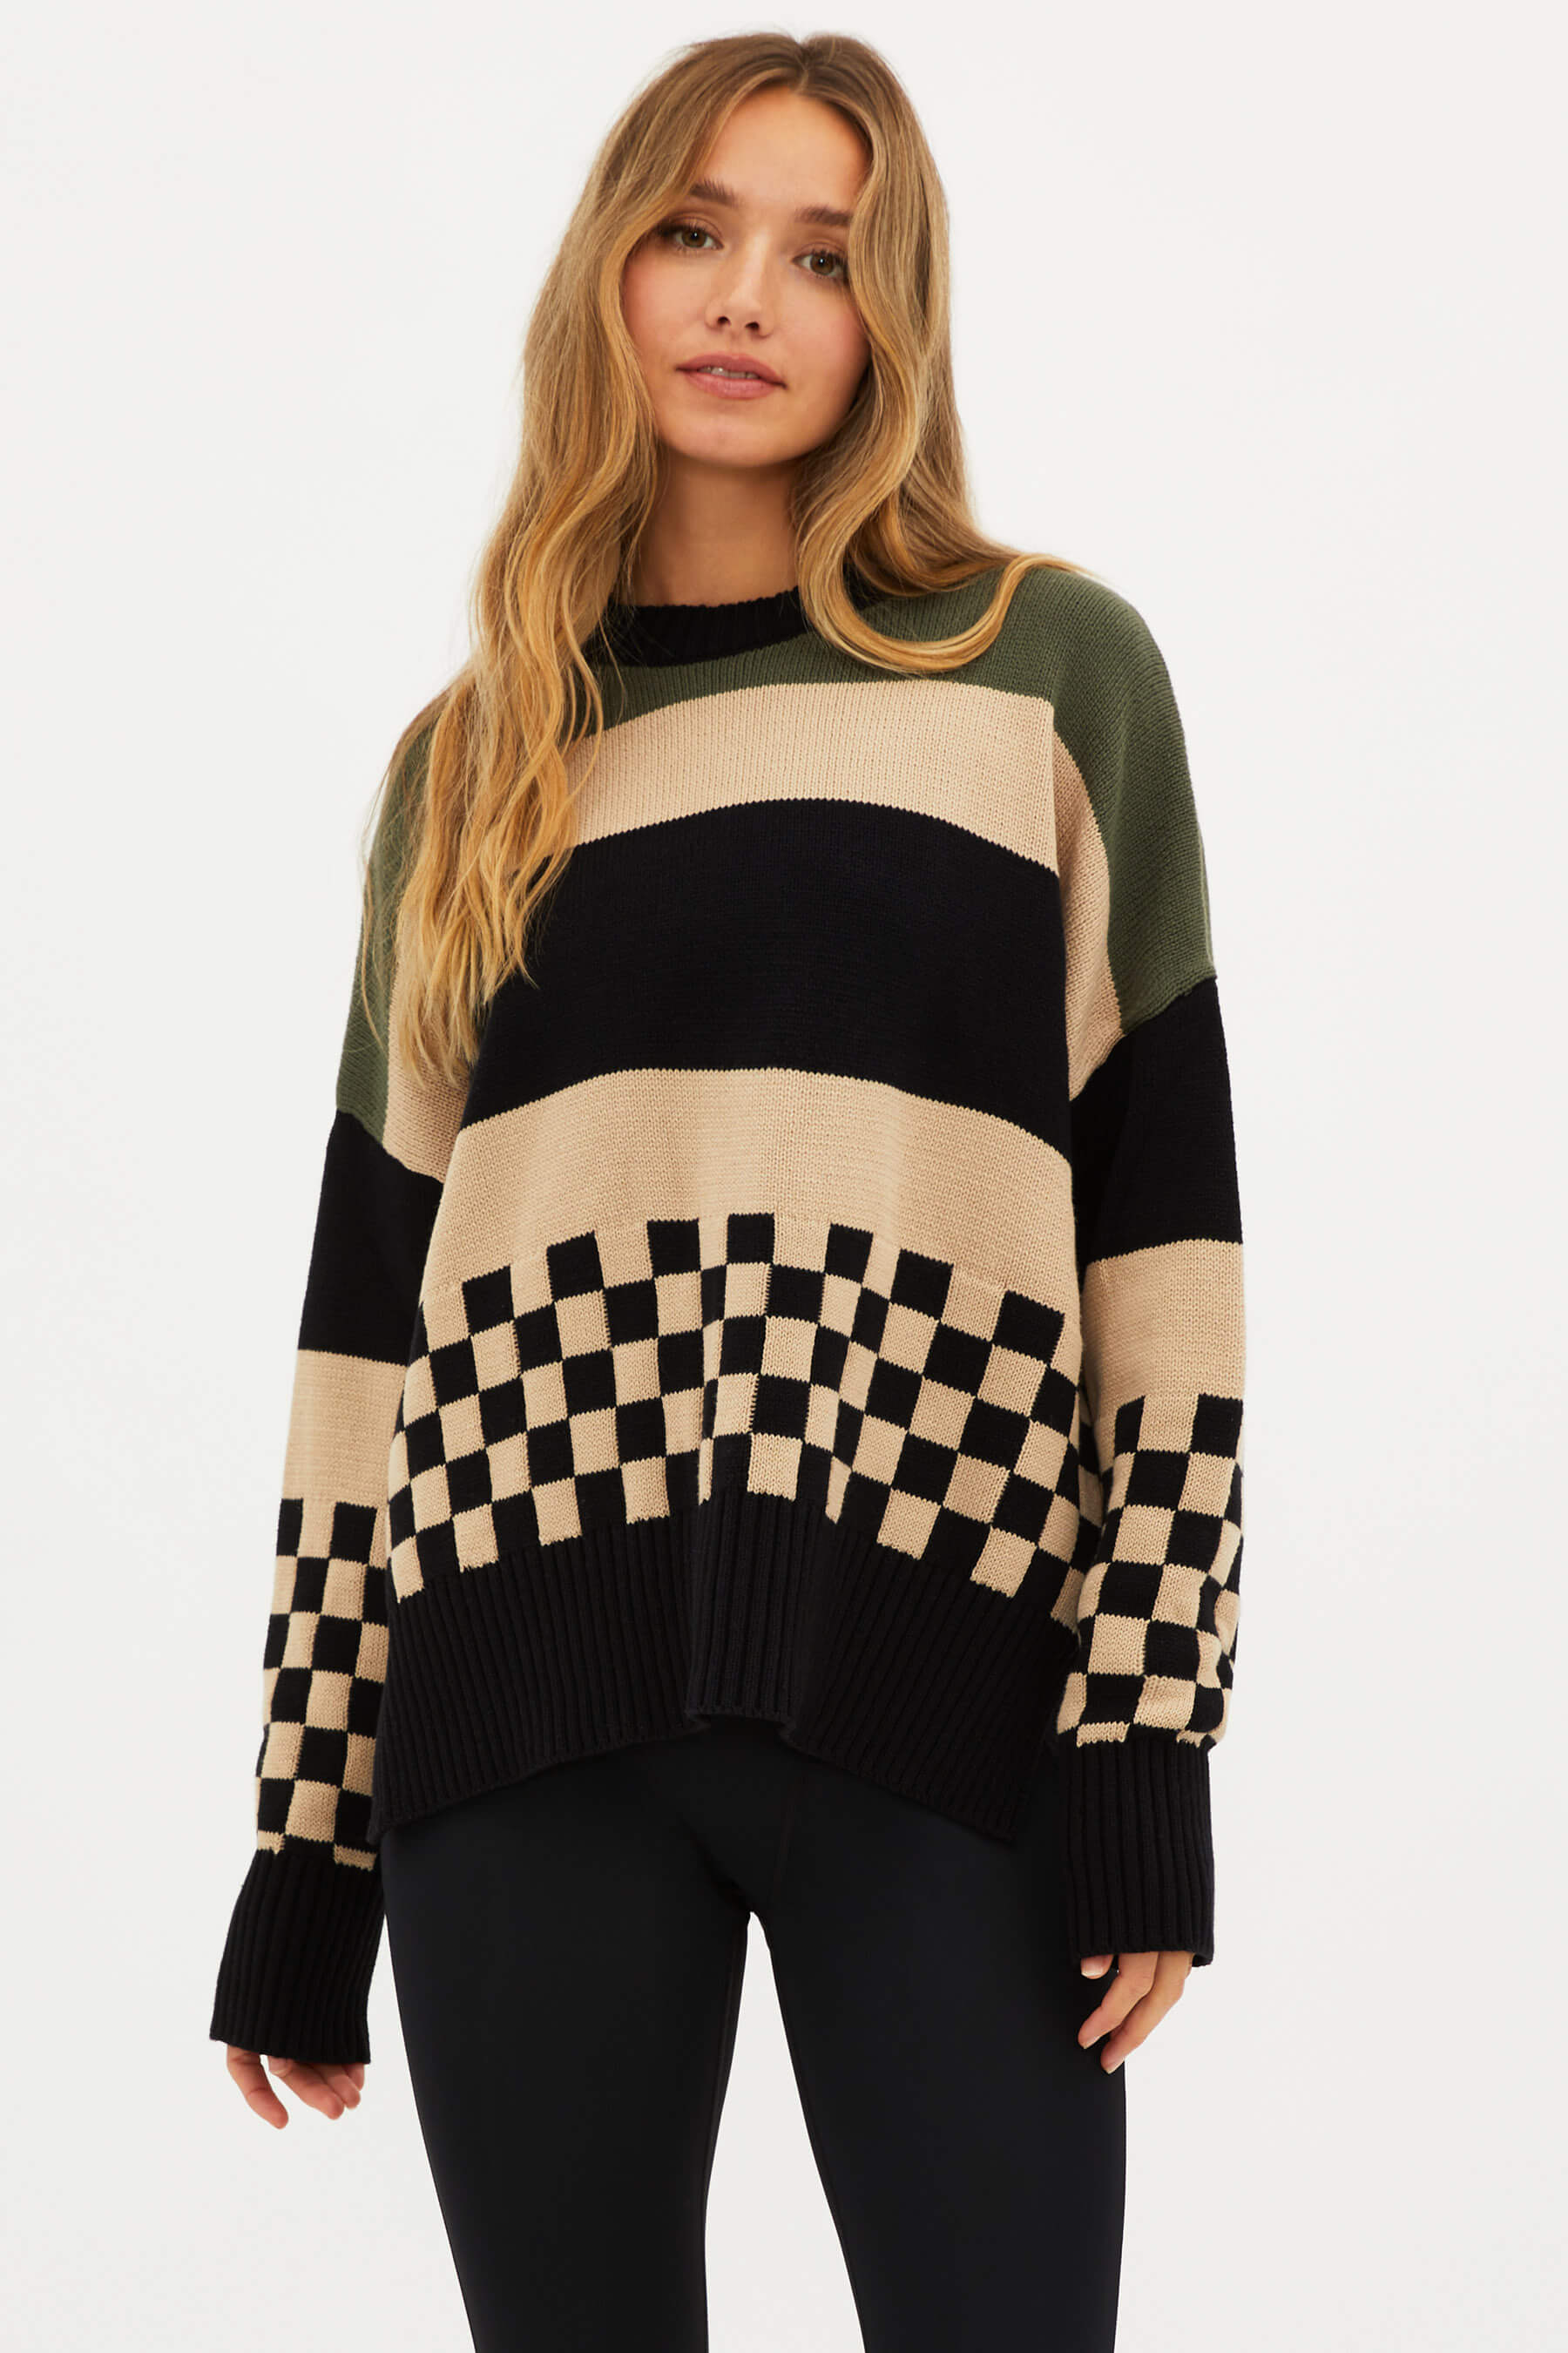 Callie Sweater Taupe & Black Check